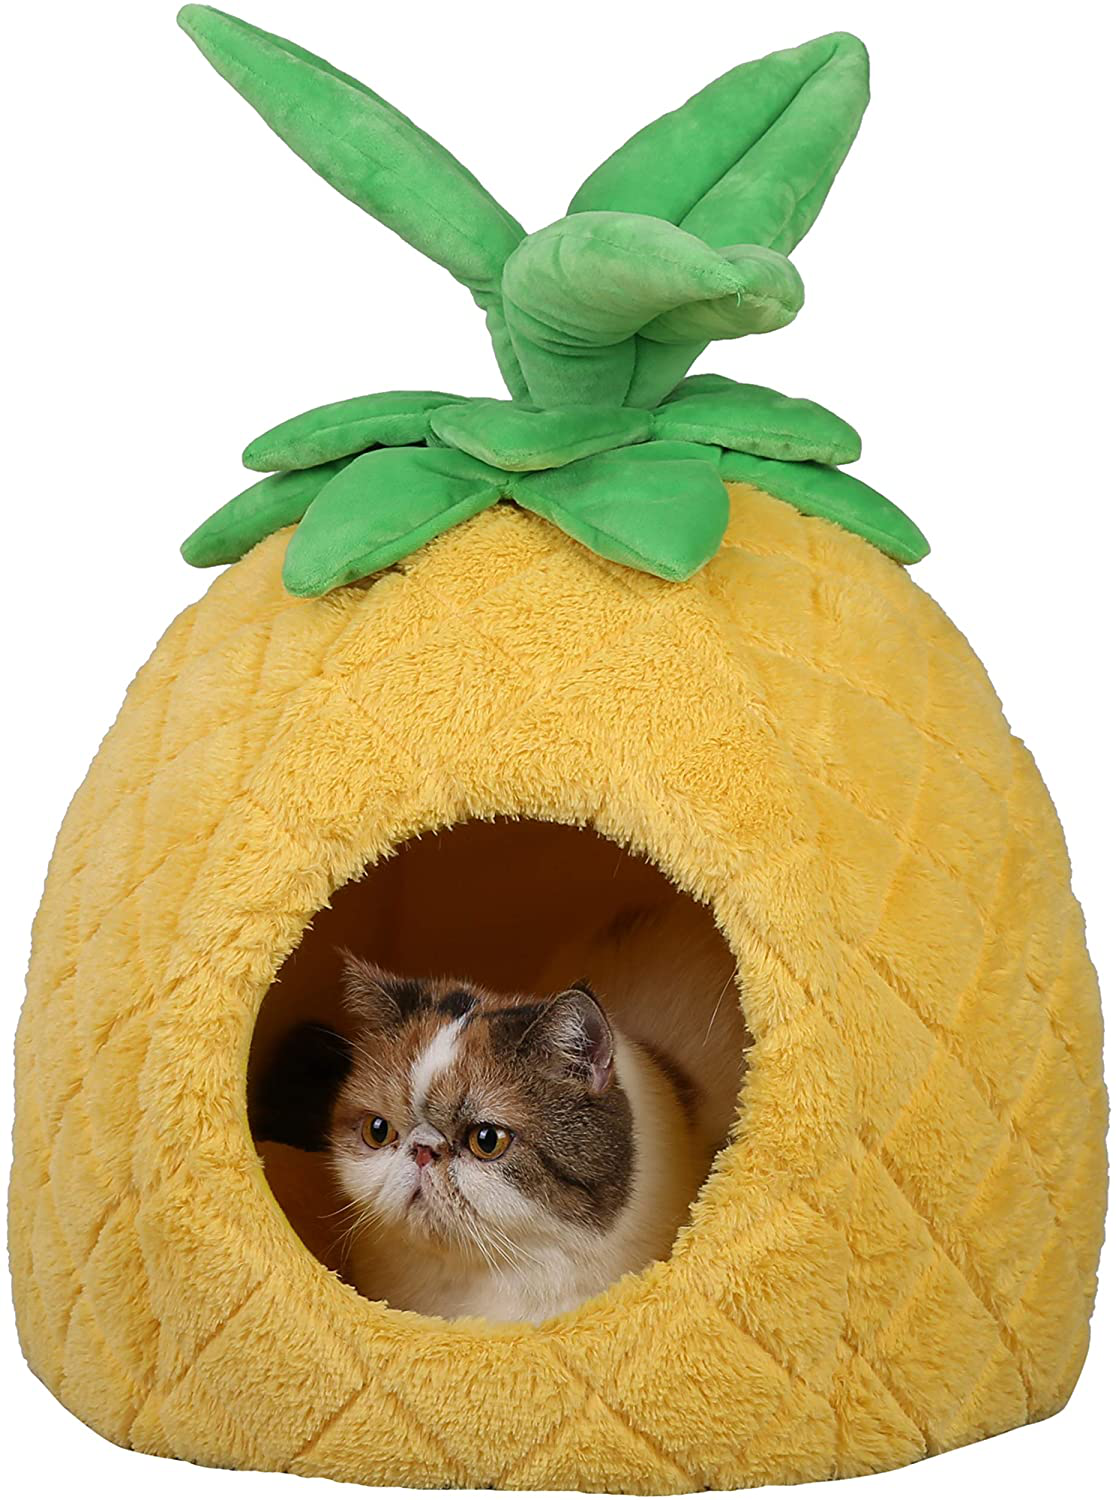 Petnpurr Pineapple Pet Bed for Cats, Puppy and Small Dogs in Super Plush Self-Warming Material – Soft Cushion, Fun Design, Private Cat Cave and Dog House